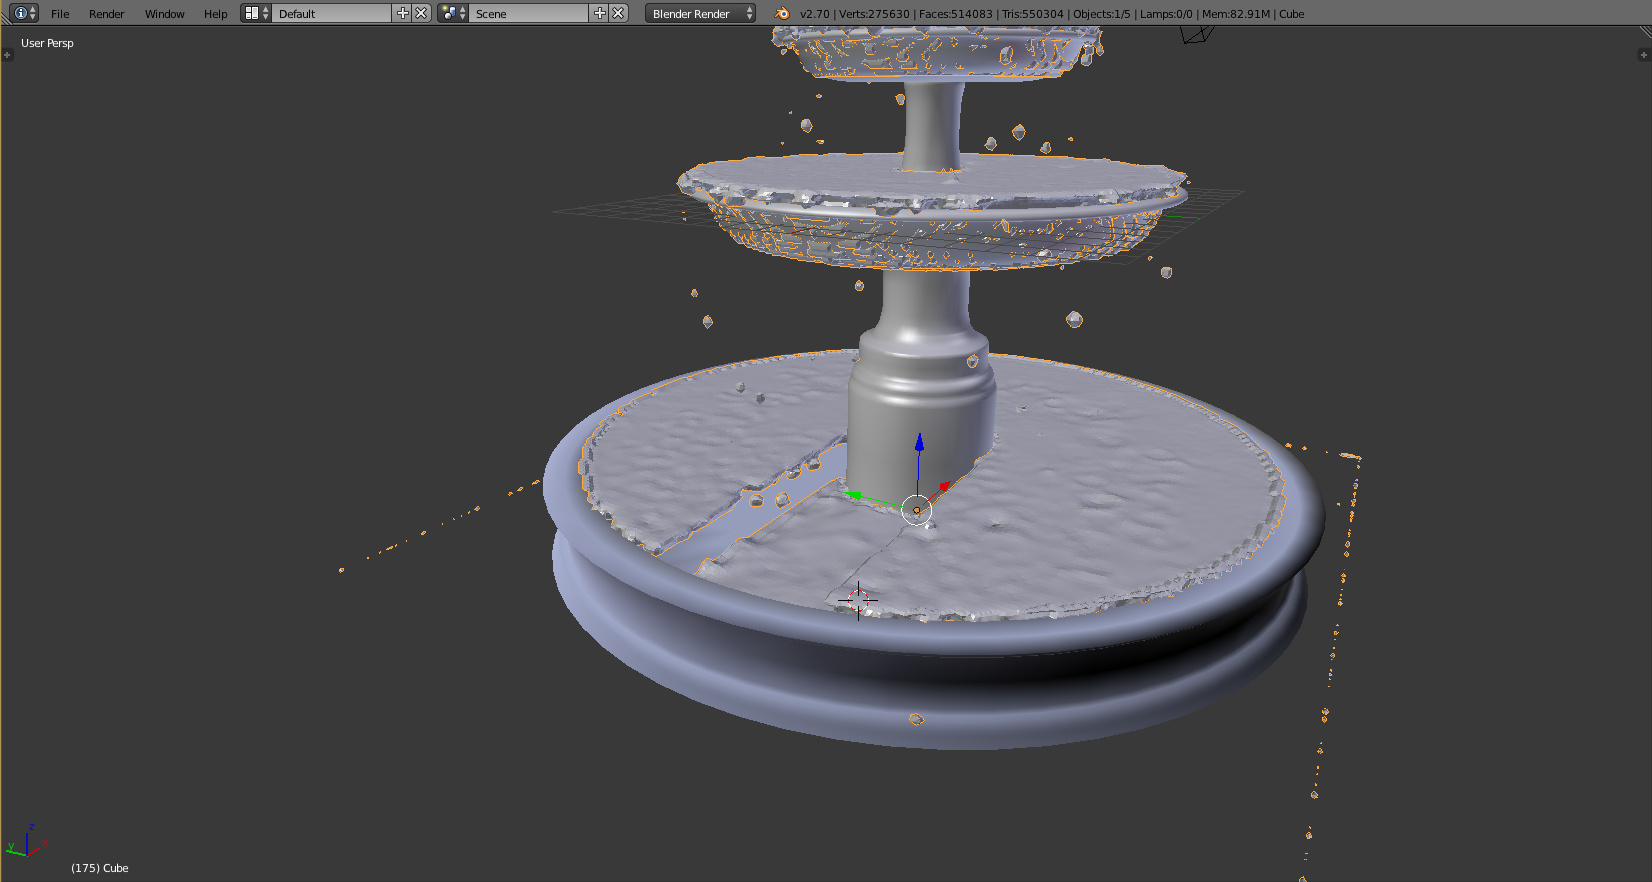 Fountain water simulation - Particles and Simulations - Blender Artists Community